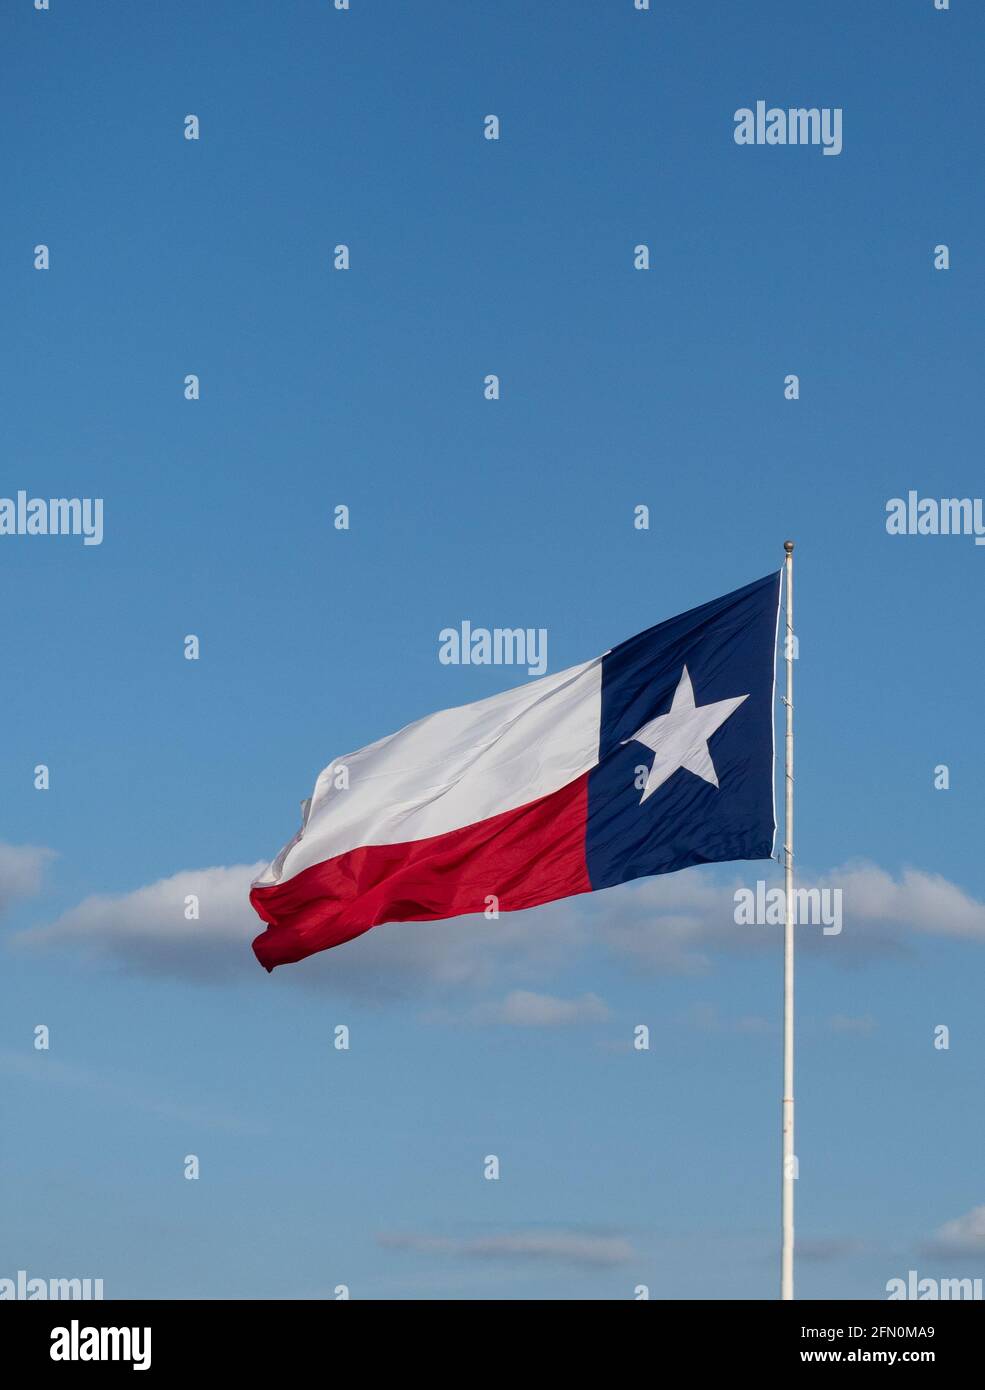 Texas Lone Star state flag with white star on blue background unfurled on a windy day. Blue sky with clouds in the background. Image has copy space. Stock Photo